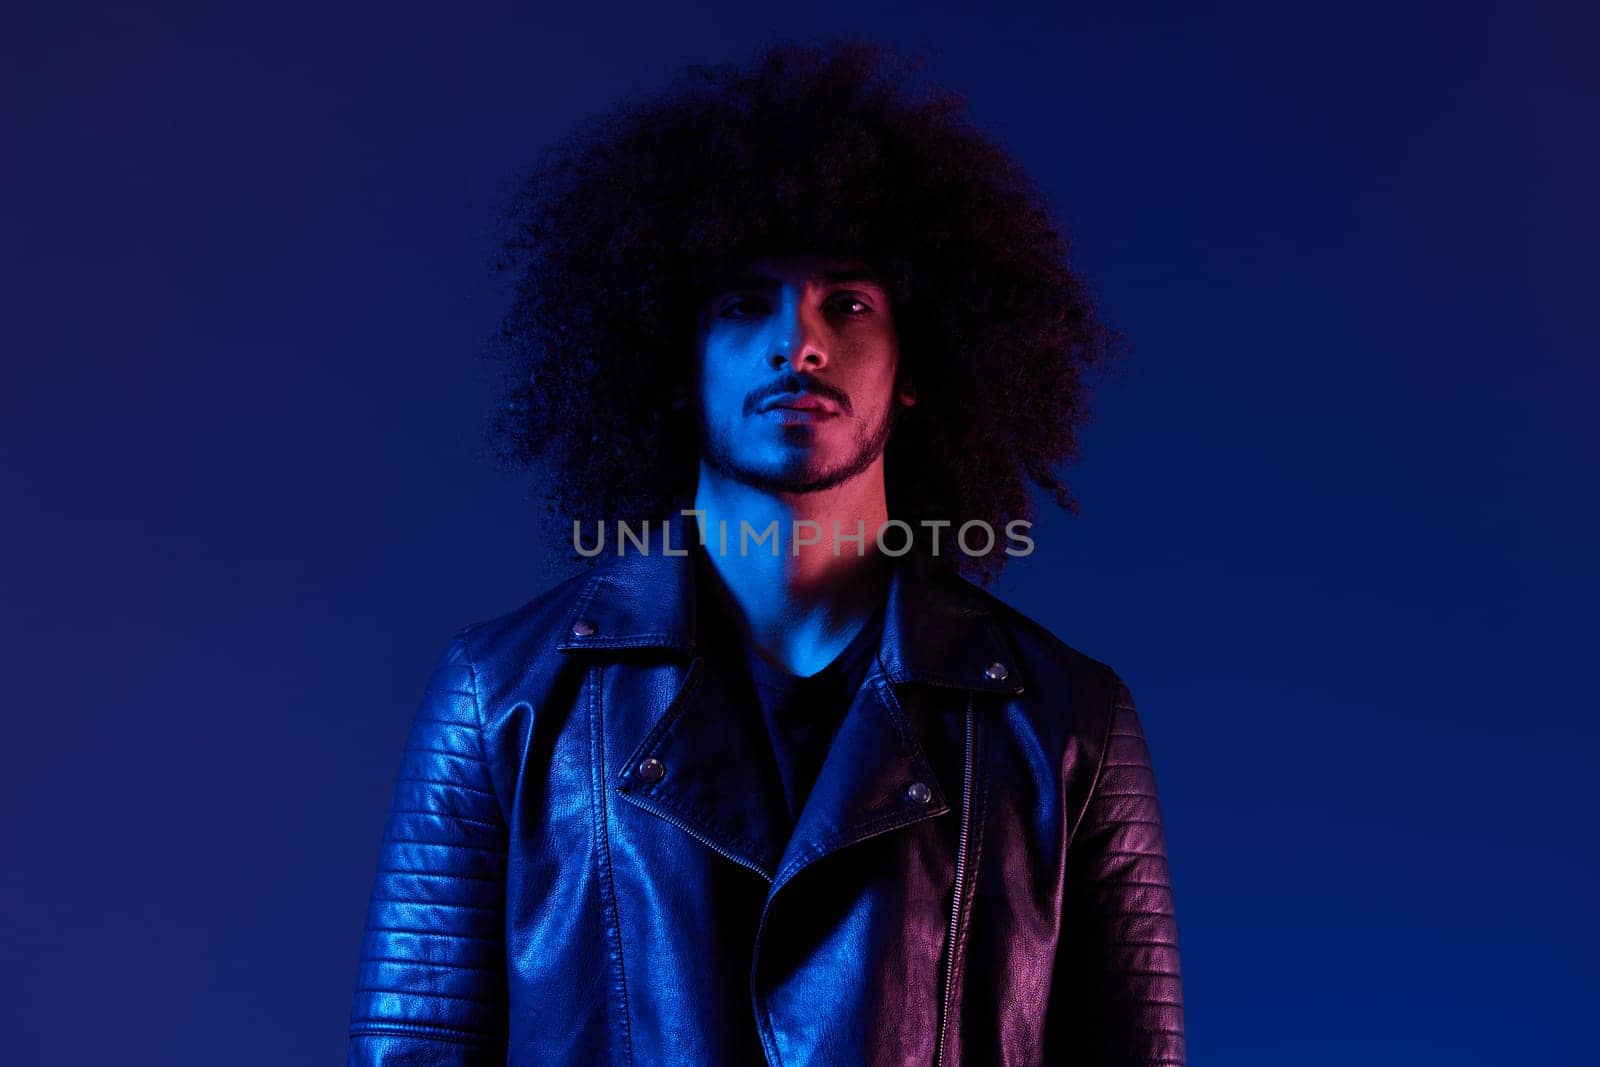 Portrait of fashion man with curly hair on blue background multinational, colored light, black leather jacket trend, modern concept. High quality photo